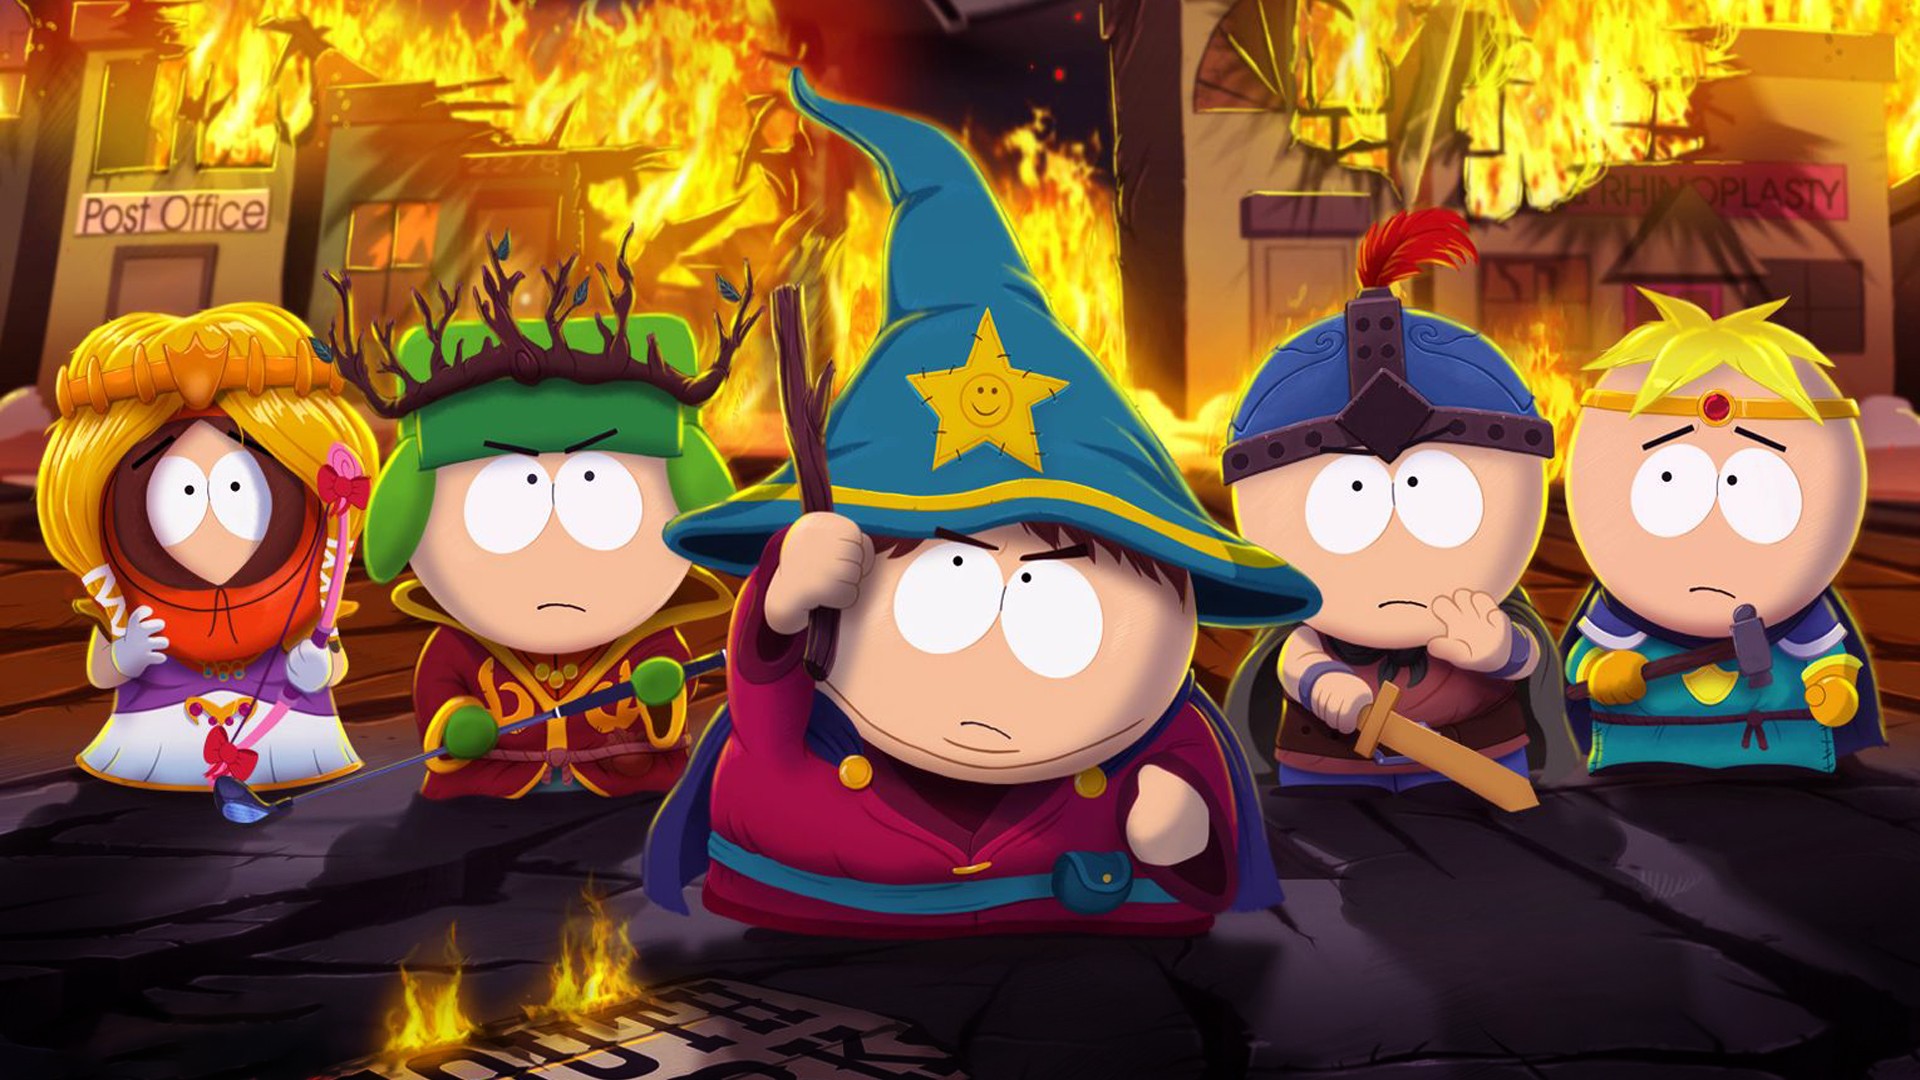 South Park Stick of Truth